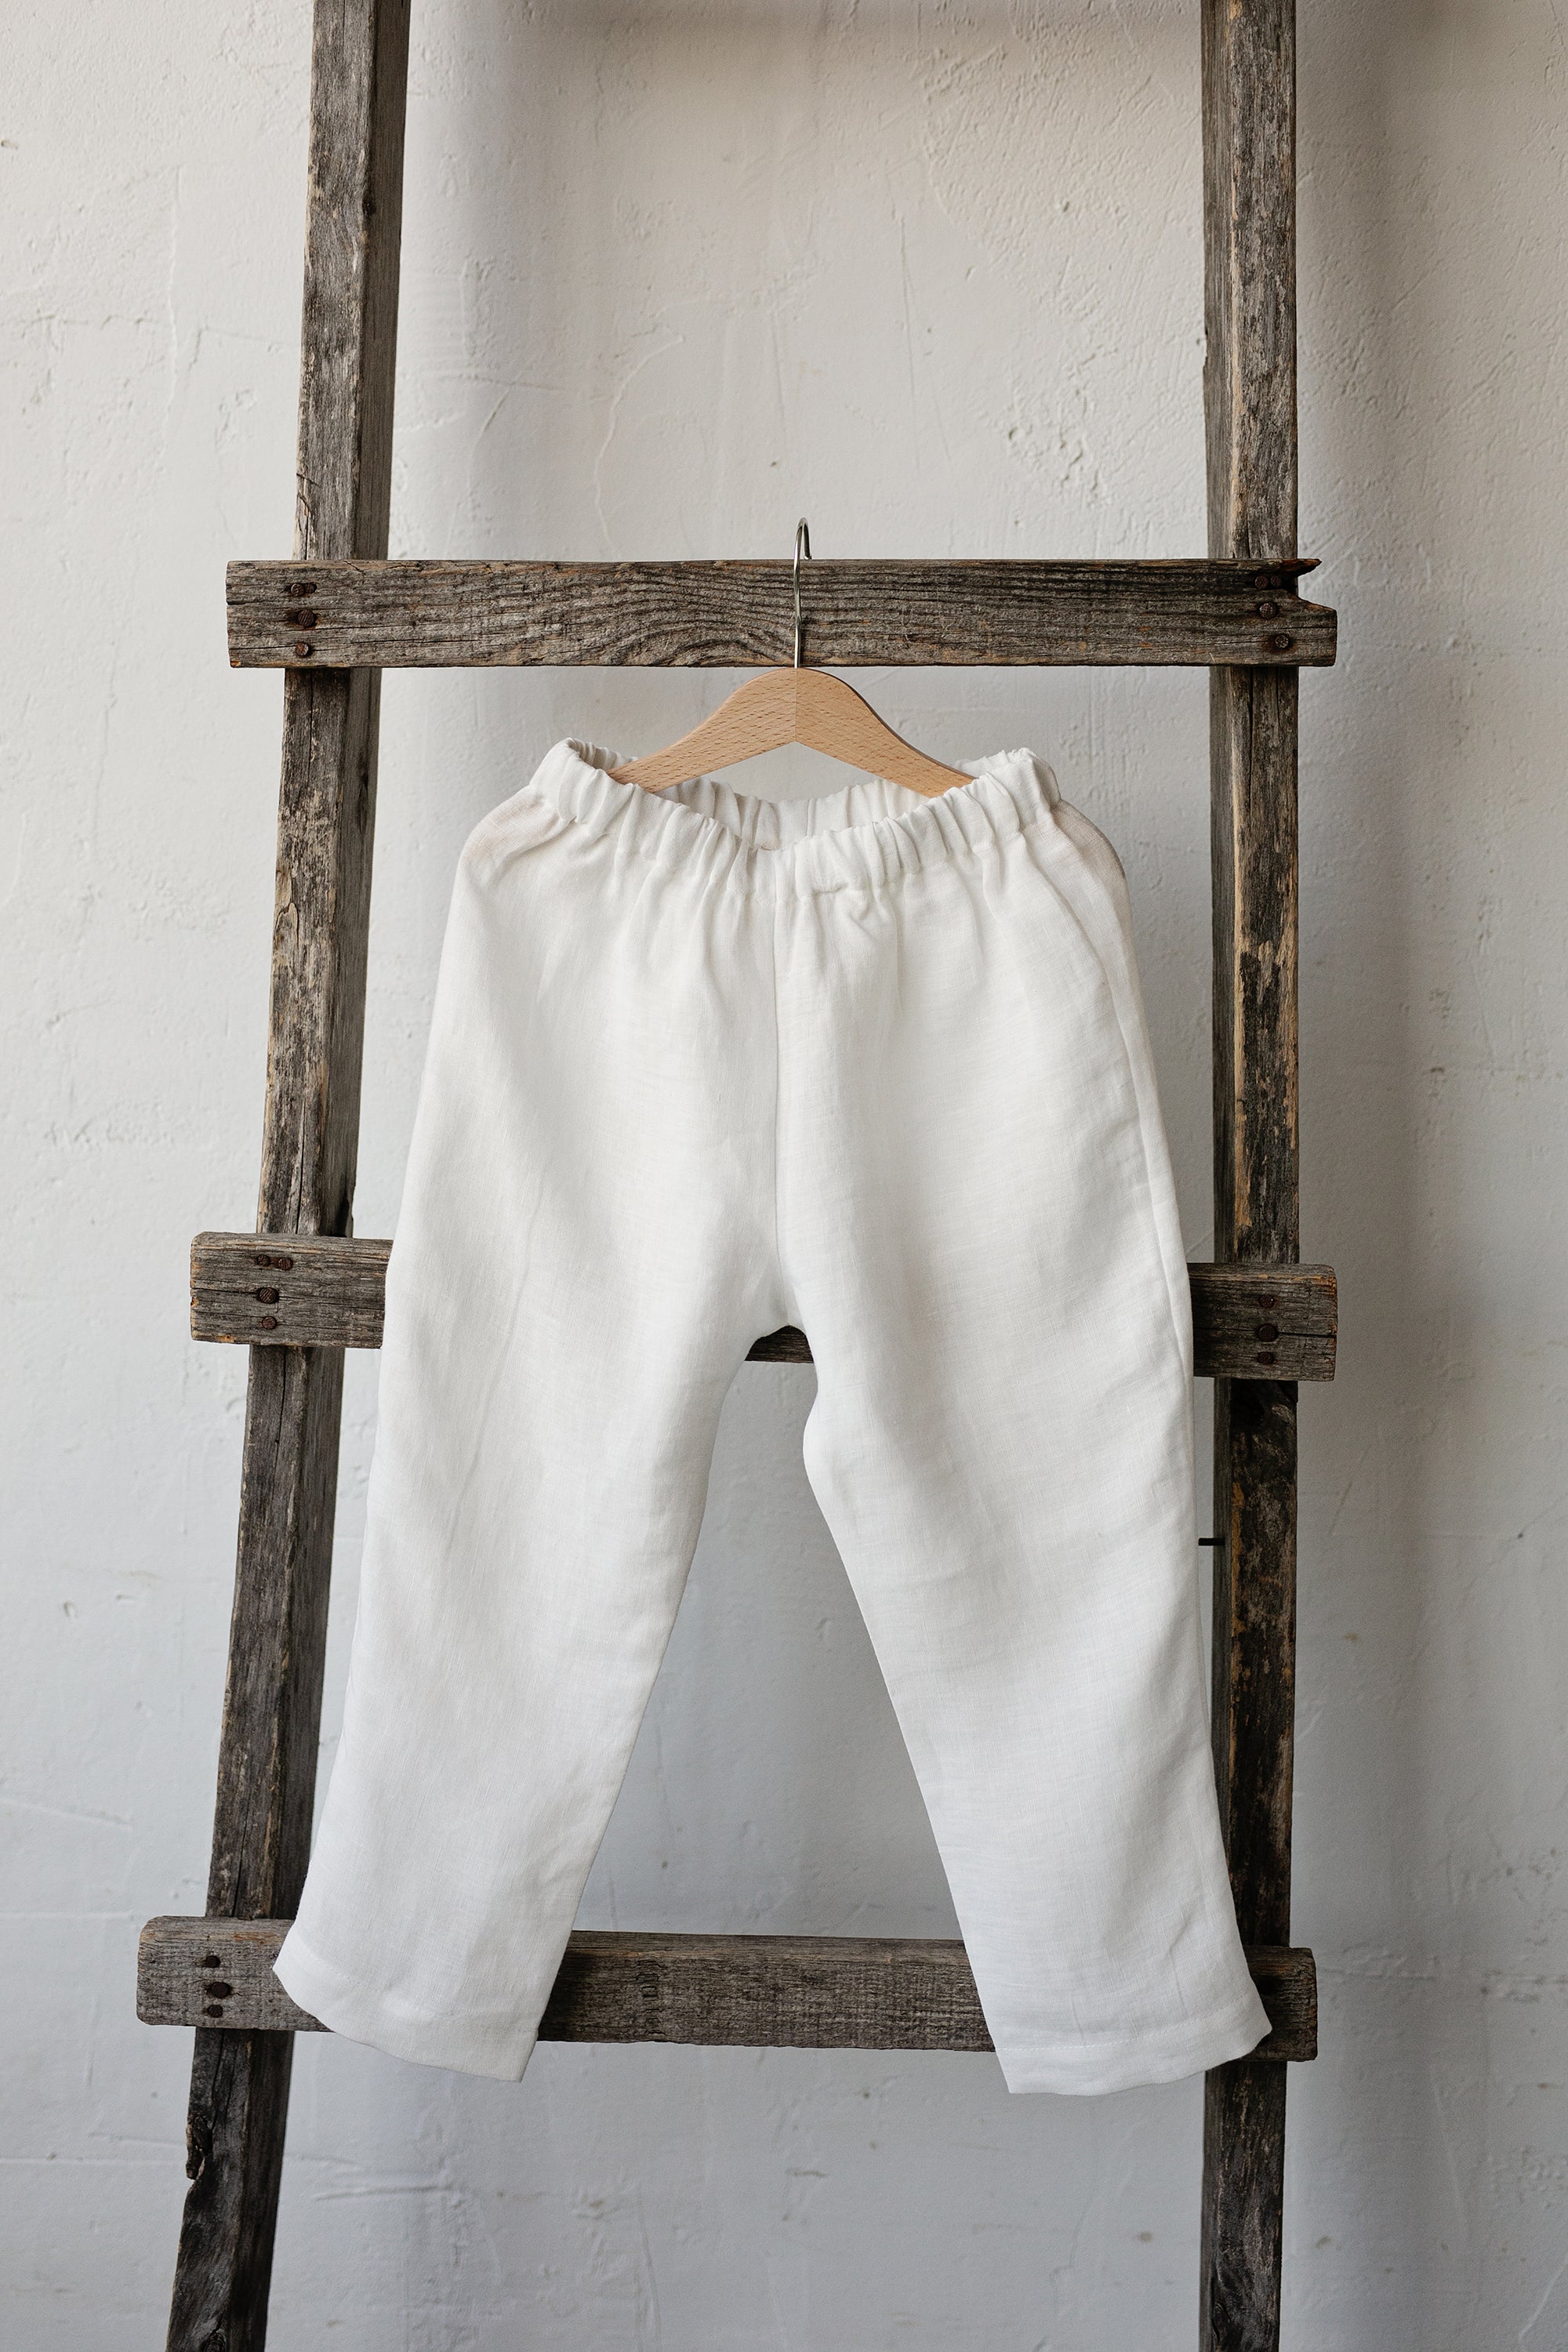 a white pair of pants hanging on a wooden ladder